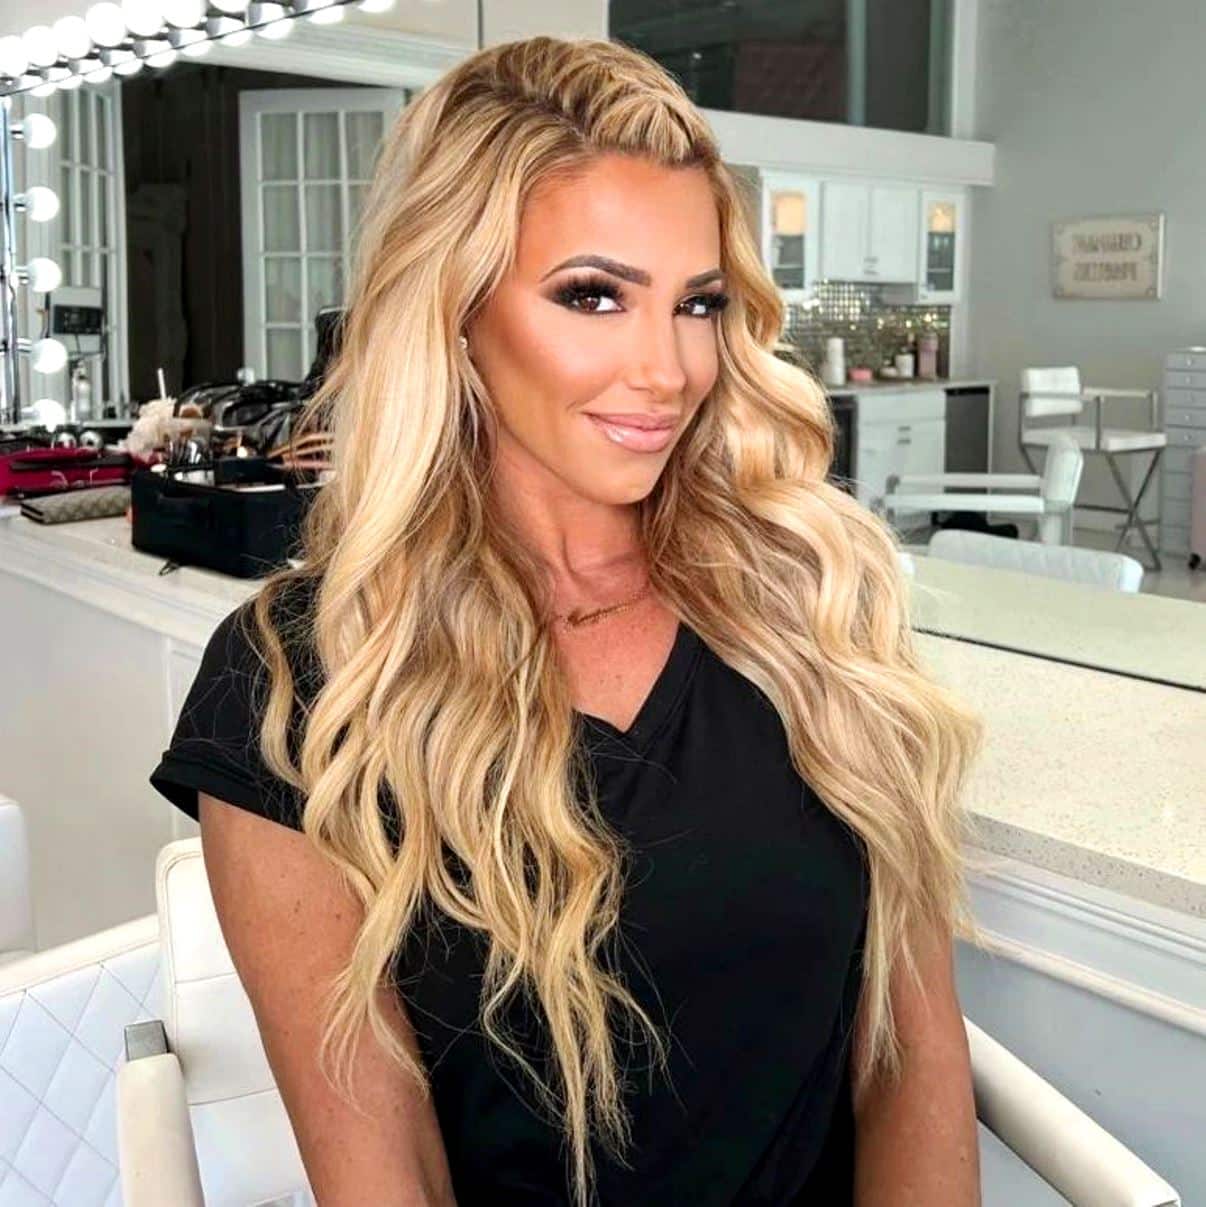 Hairstylist Accuses Danielle Cabral of Failing to Pay and Promote Work as RHONJ Fires Back and Suggests Woman Was Riding Her Coattails, See Their Posts